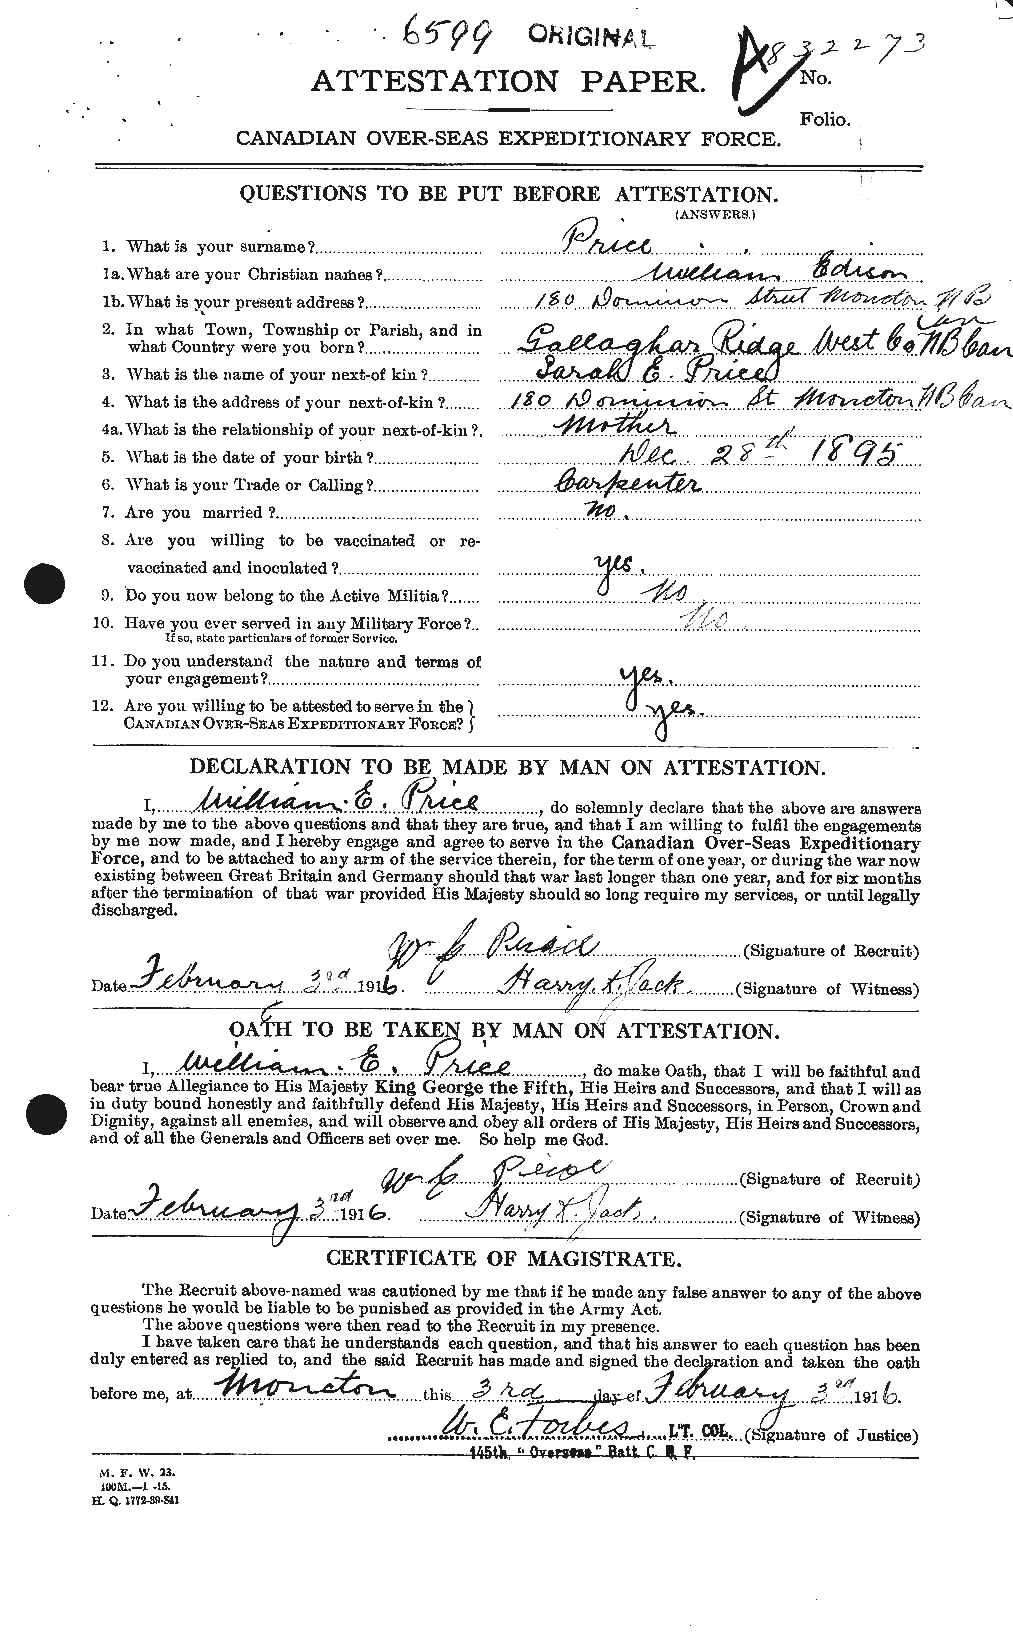 Personnel Records of the First World War - CEF 587434a